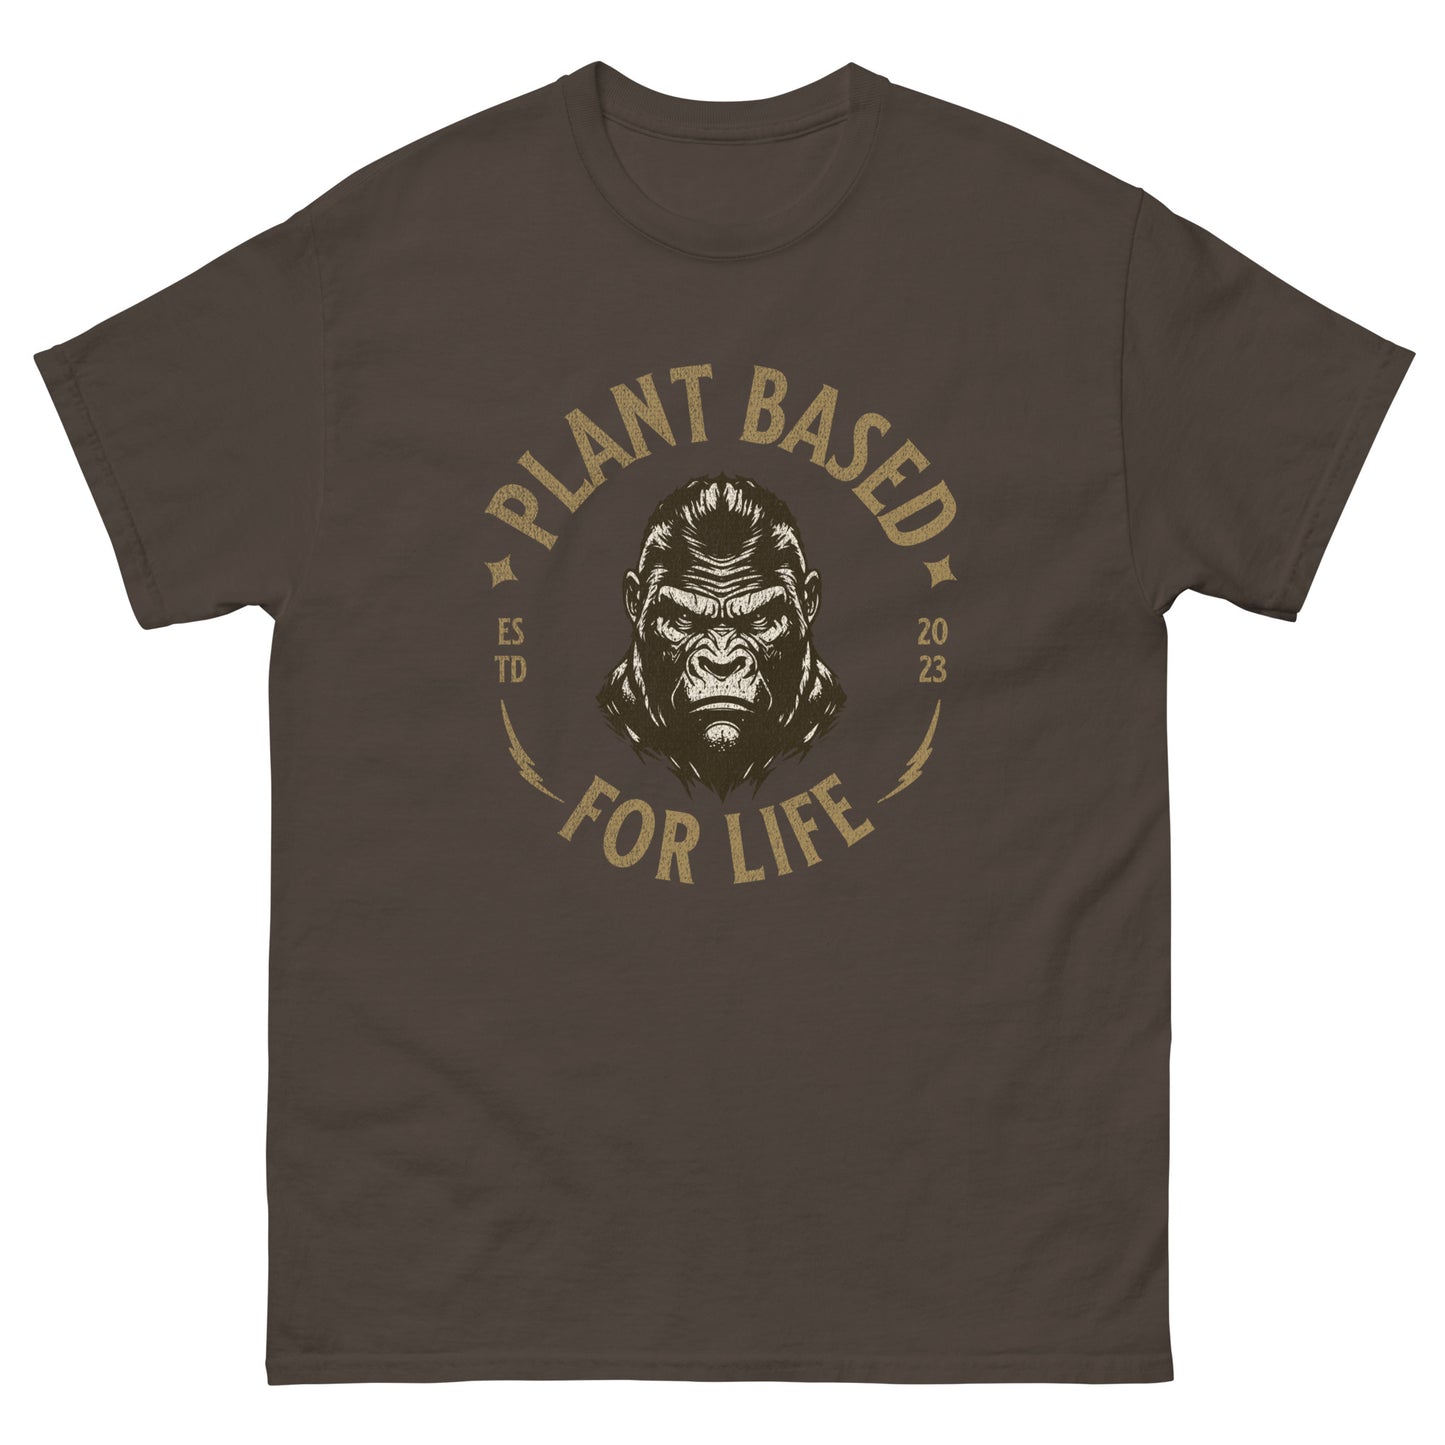 Plant Based For Life New Colors